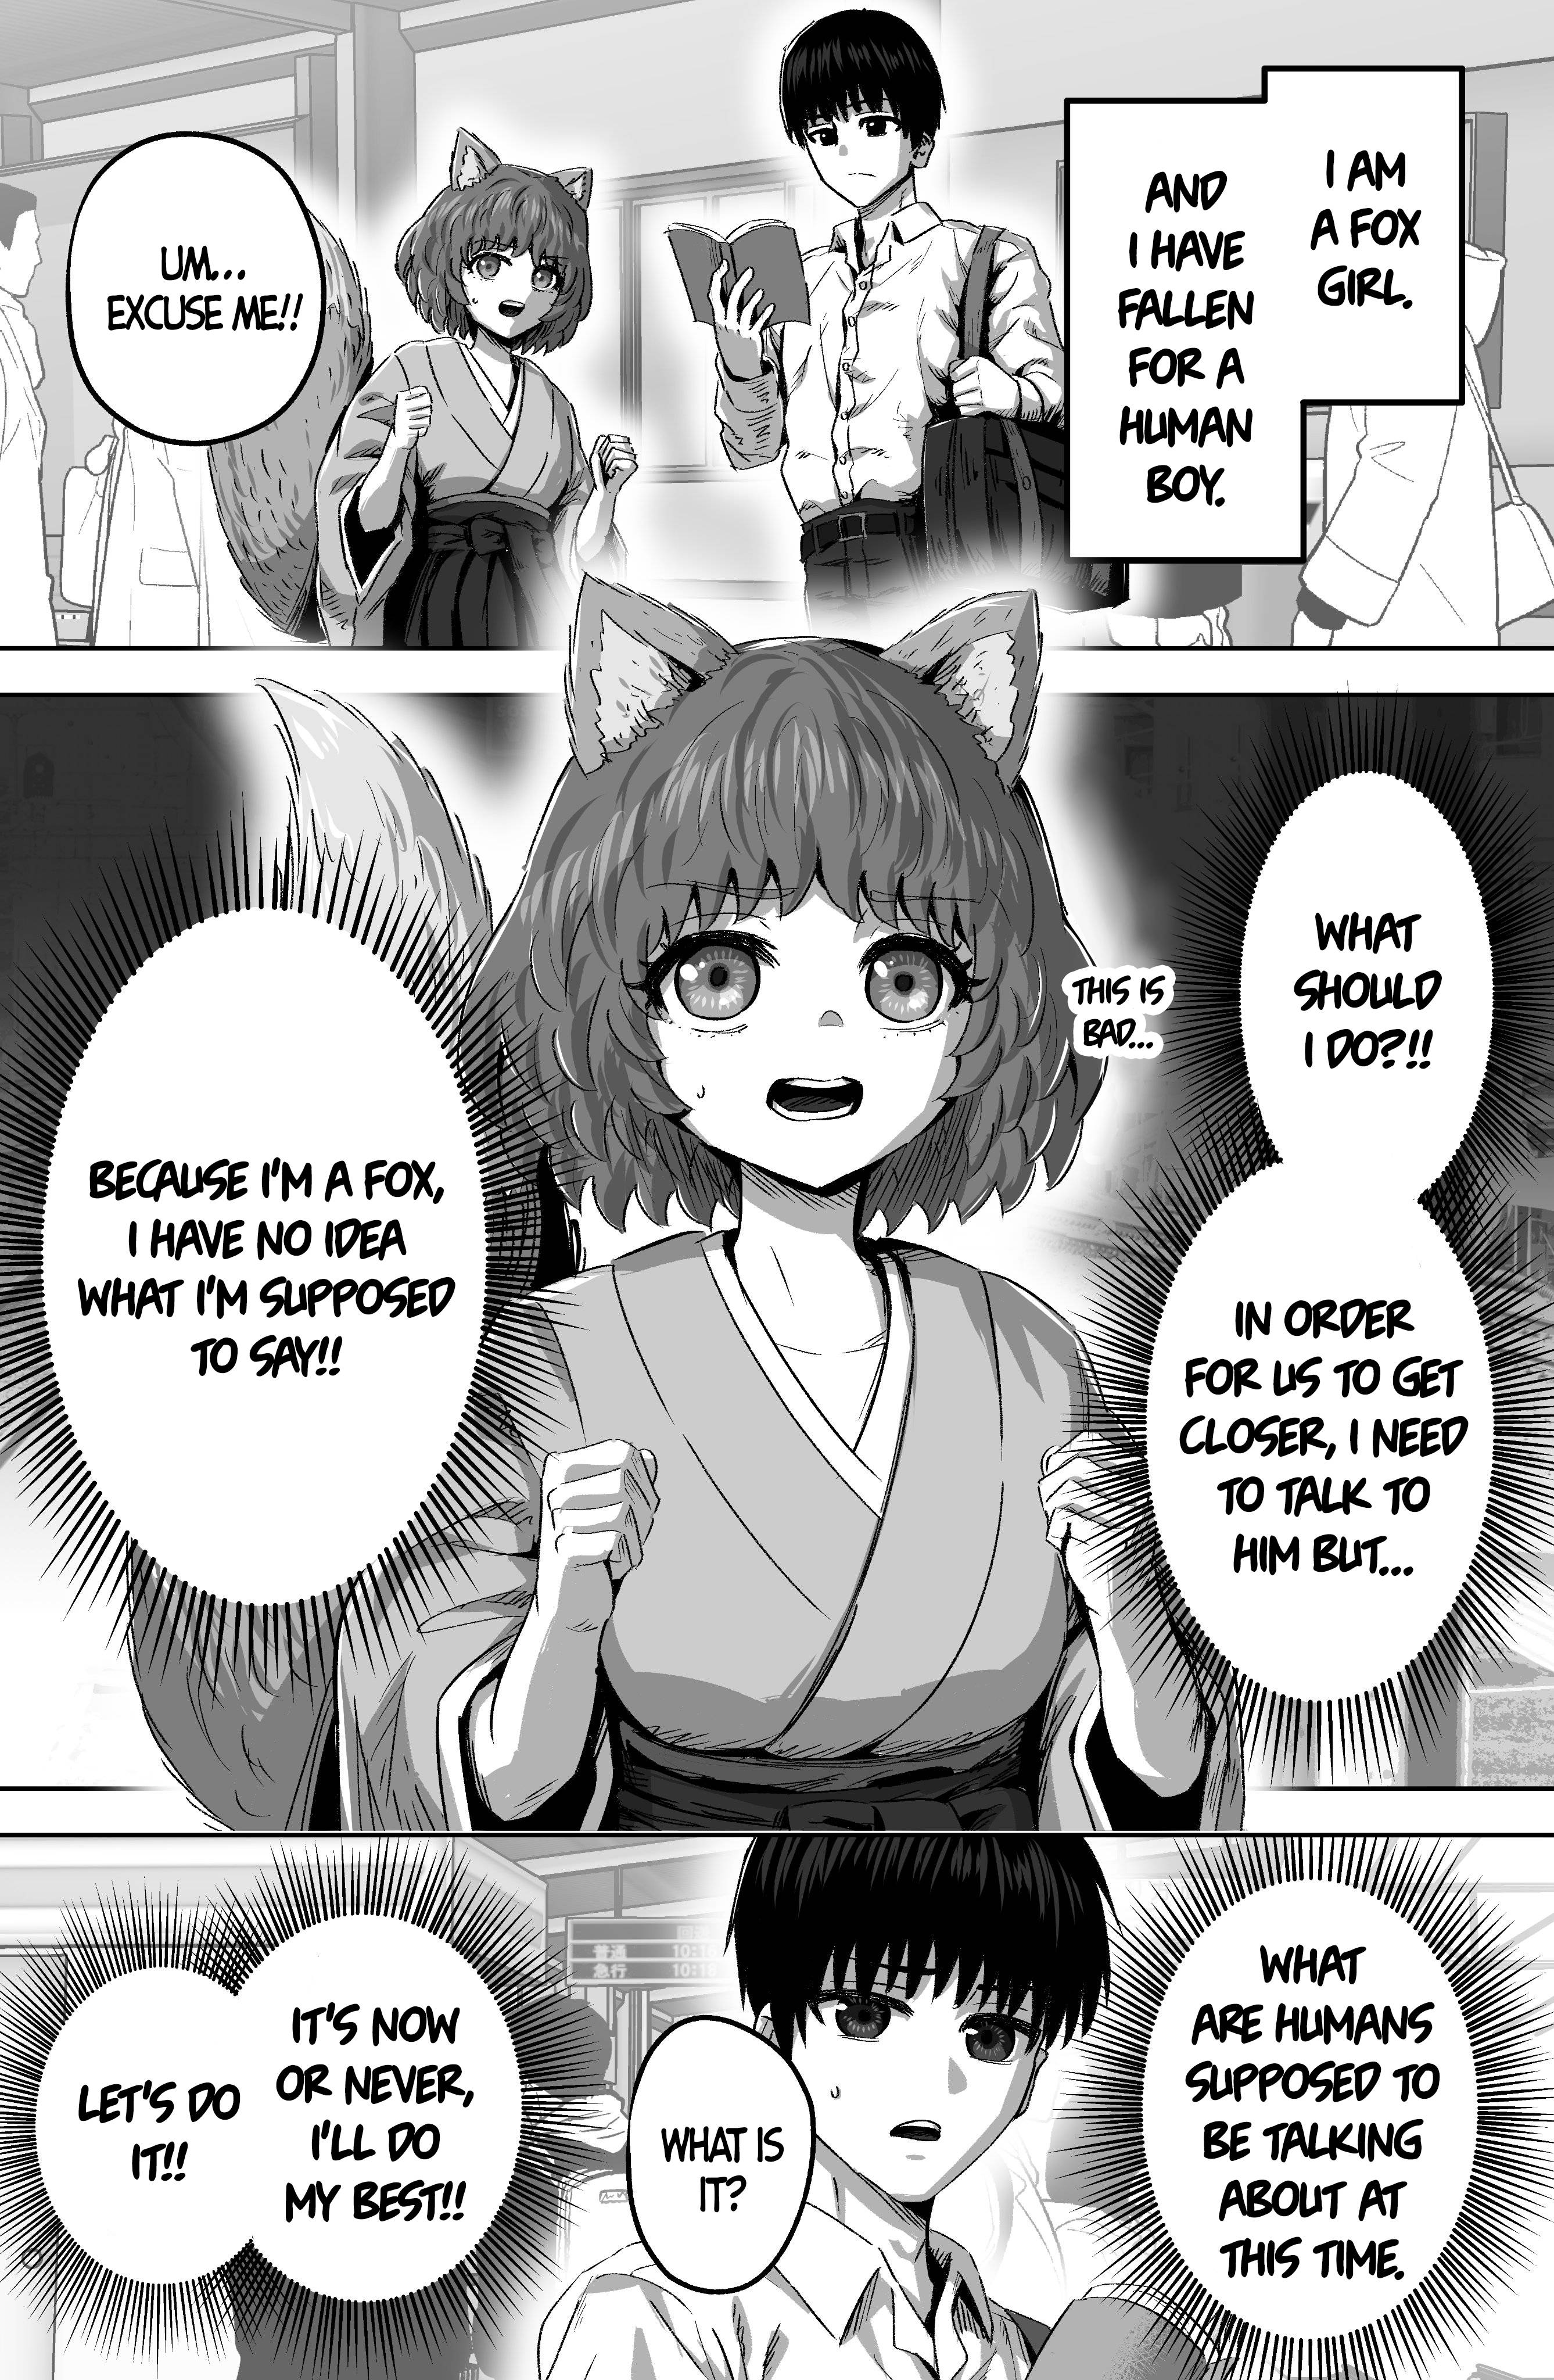 The Fox Girl Who Wants To Get Chummy With The Human Boy She Likes - chapter 3 - #1